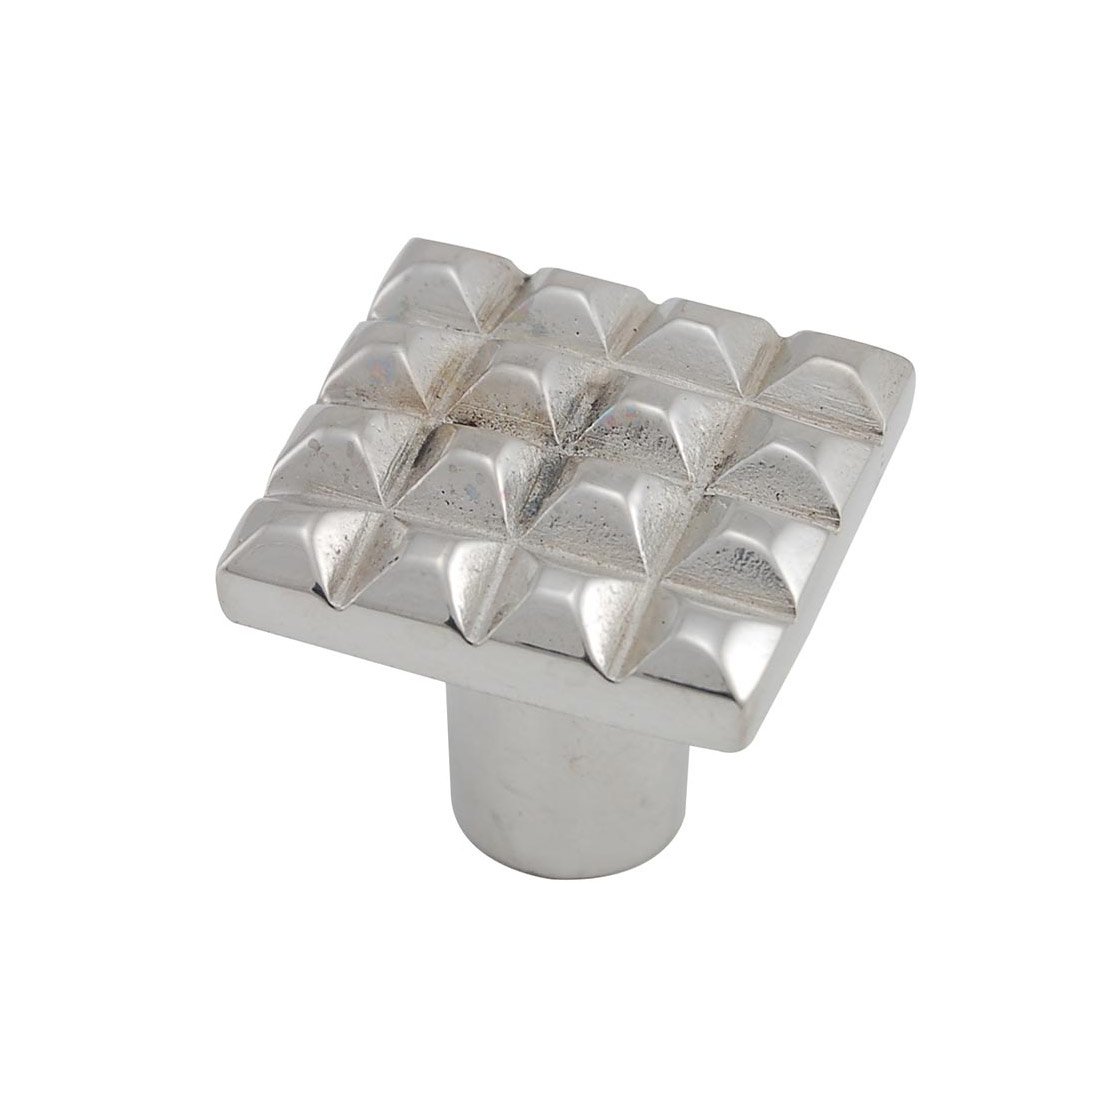 Vicenza Hardware Large Square Cube Knob in Polished Silver